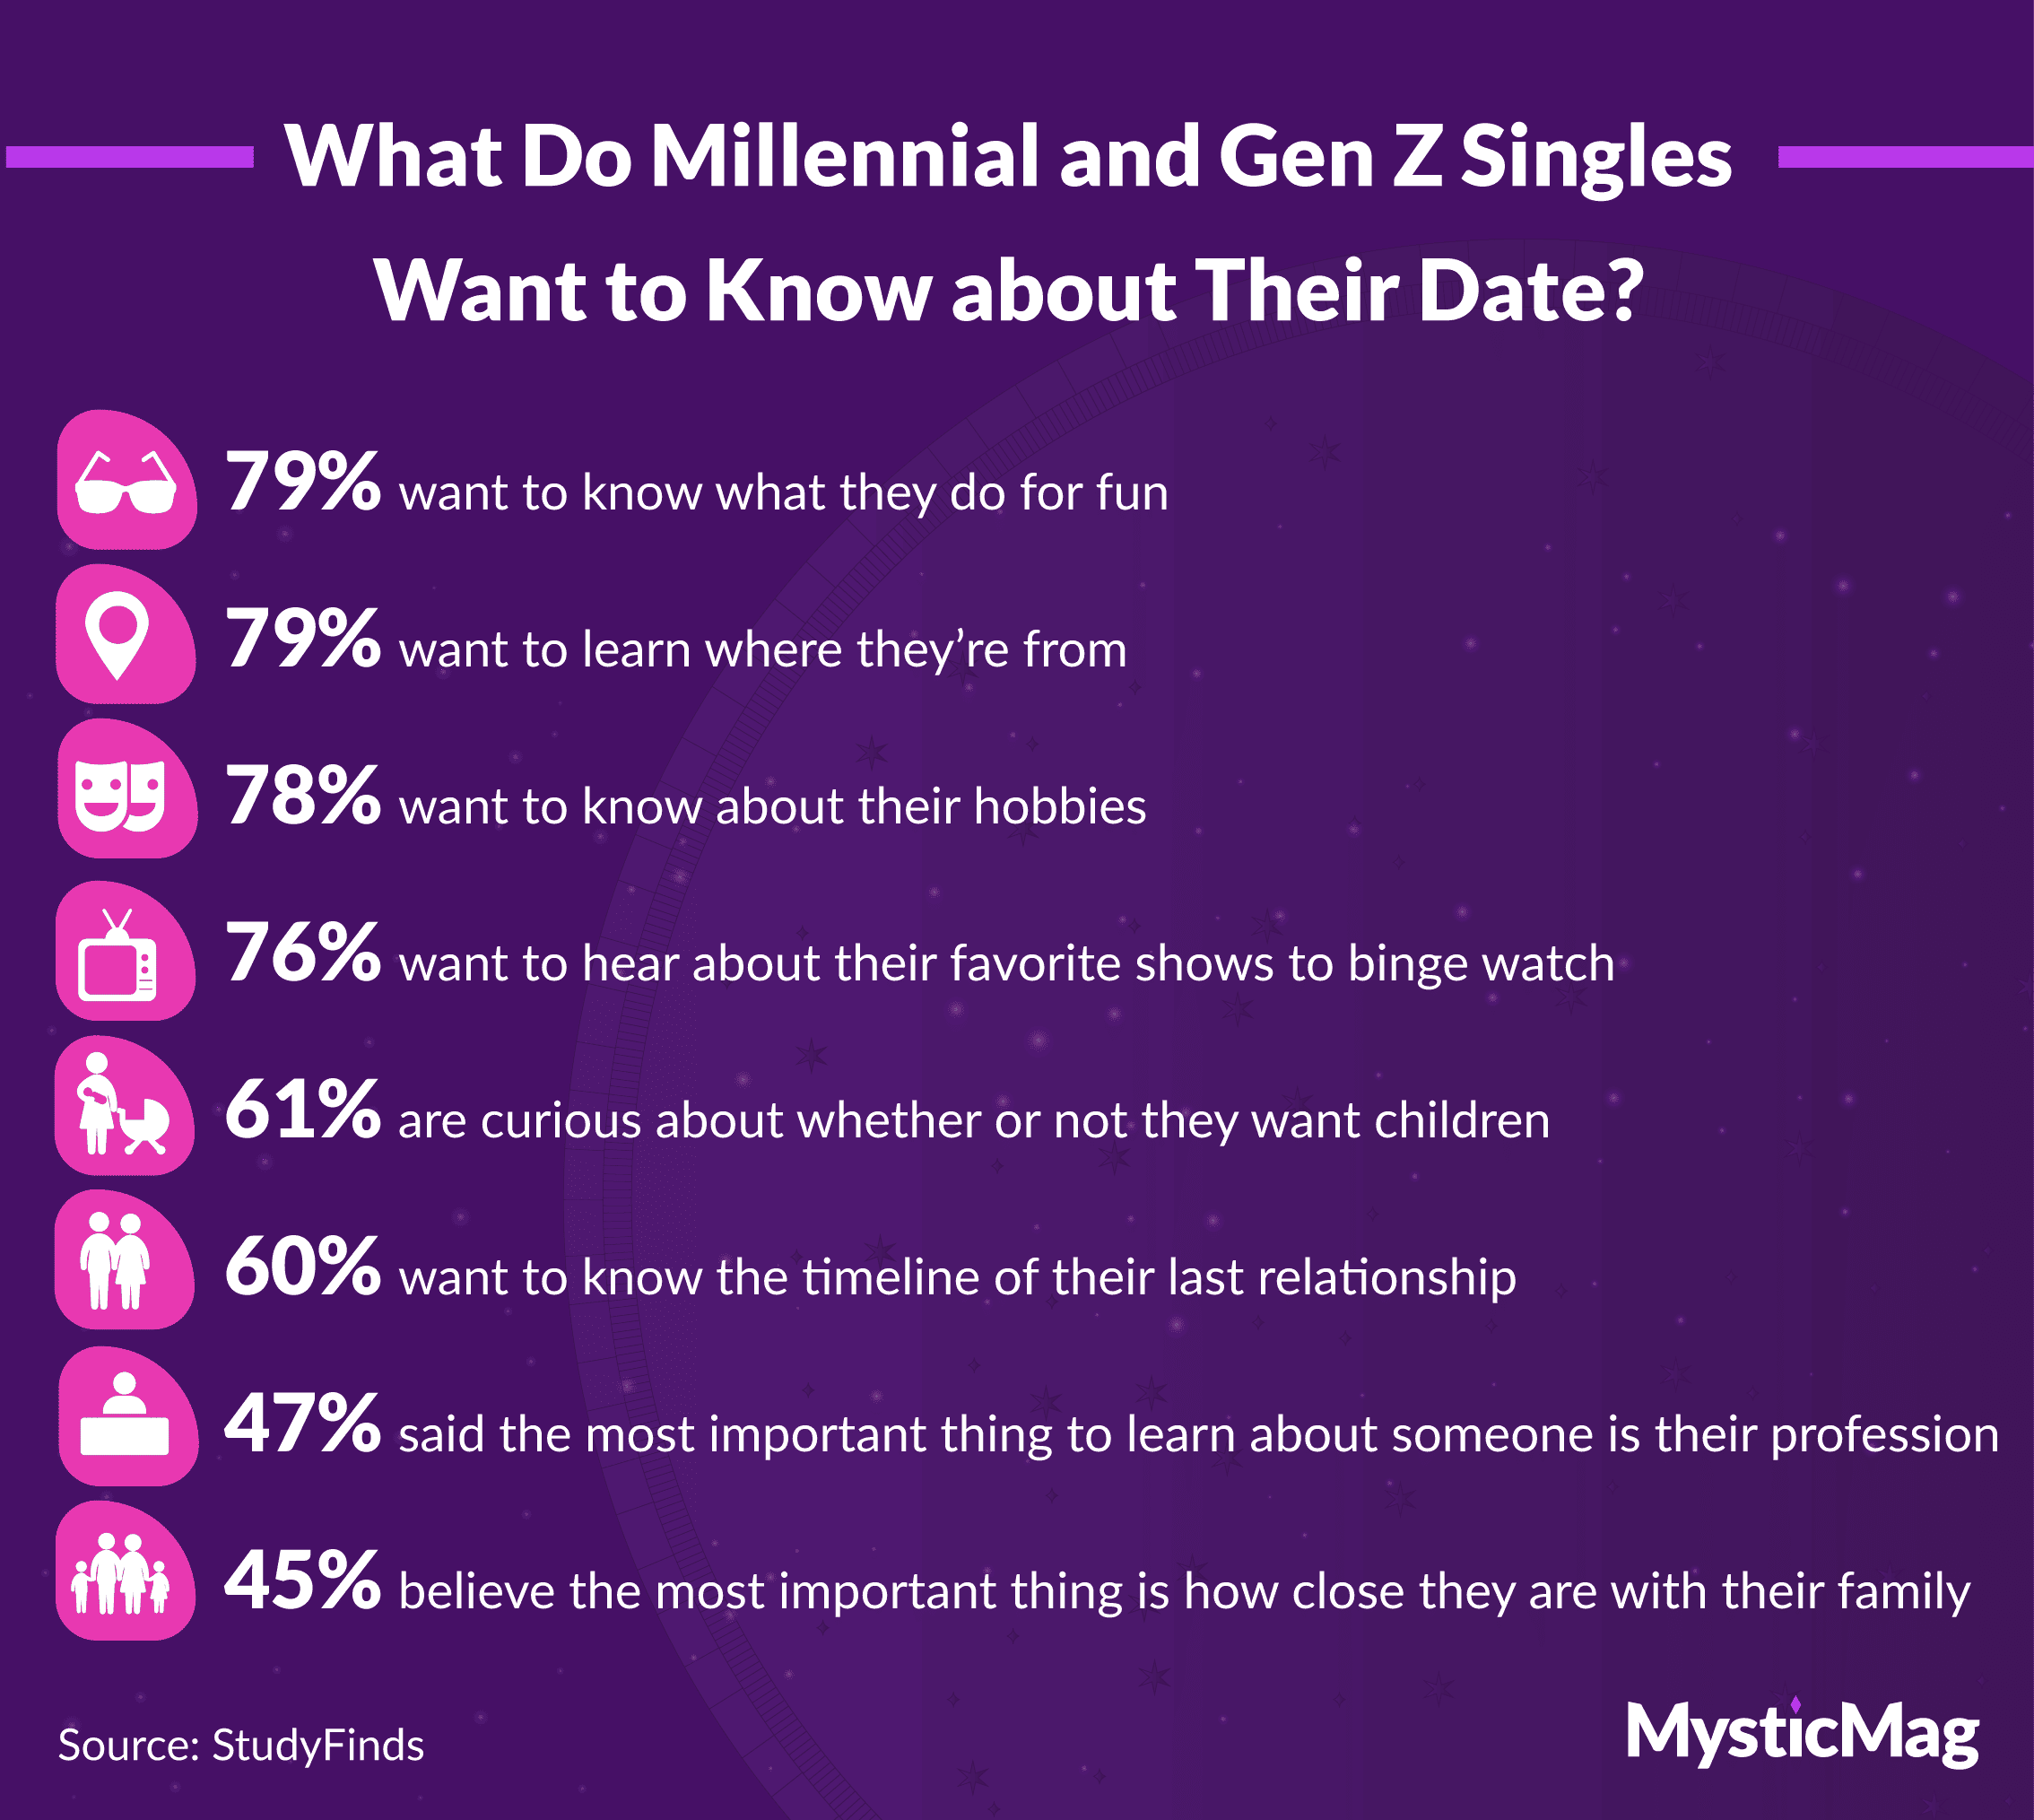 Things Millennials and Gen Zers want to know about their date